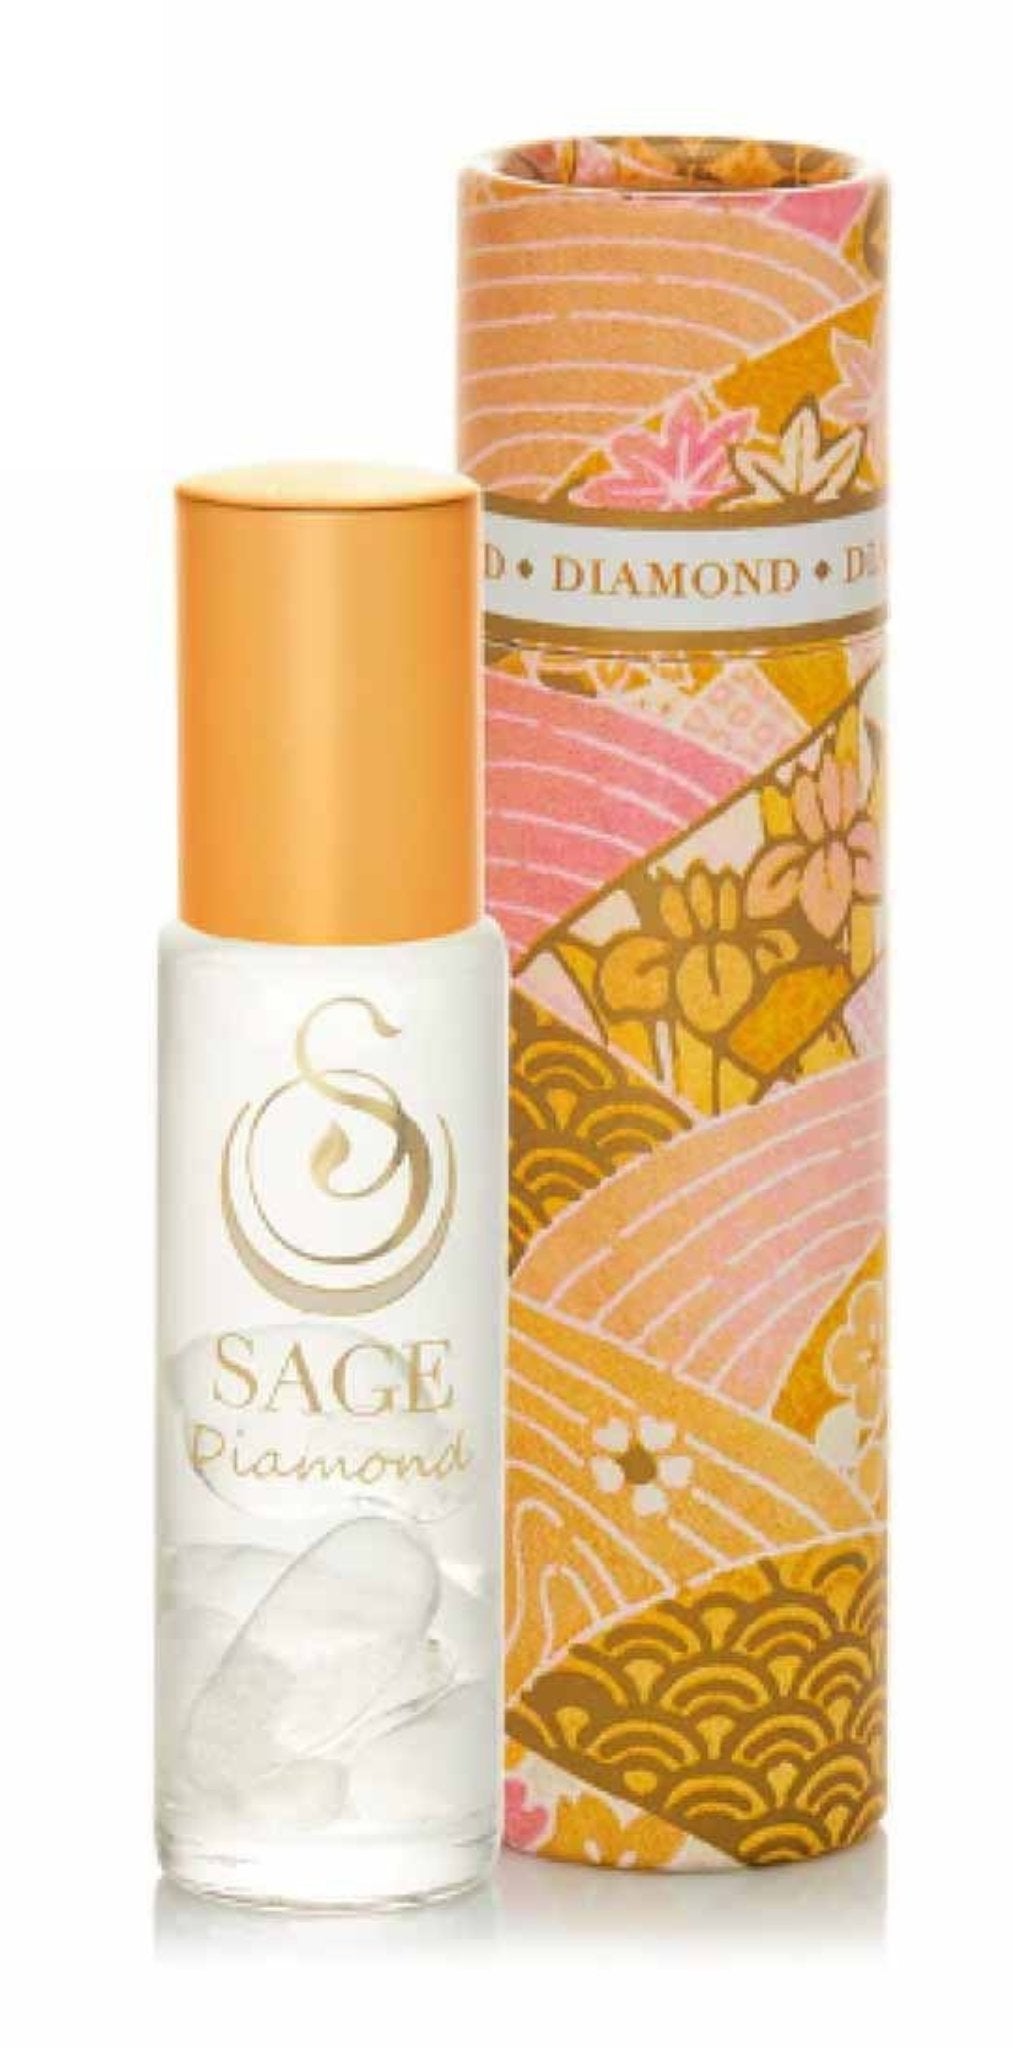 Diamond 1/4 oz Gemstone Perfume Oil Concentrate Roll-On by Sage - The Sage Lifestyle